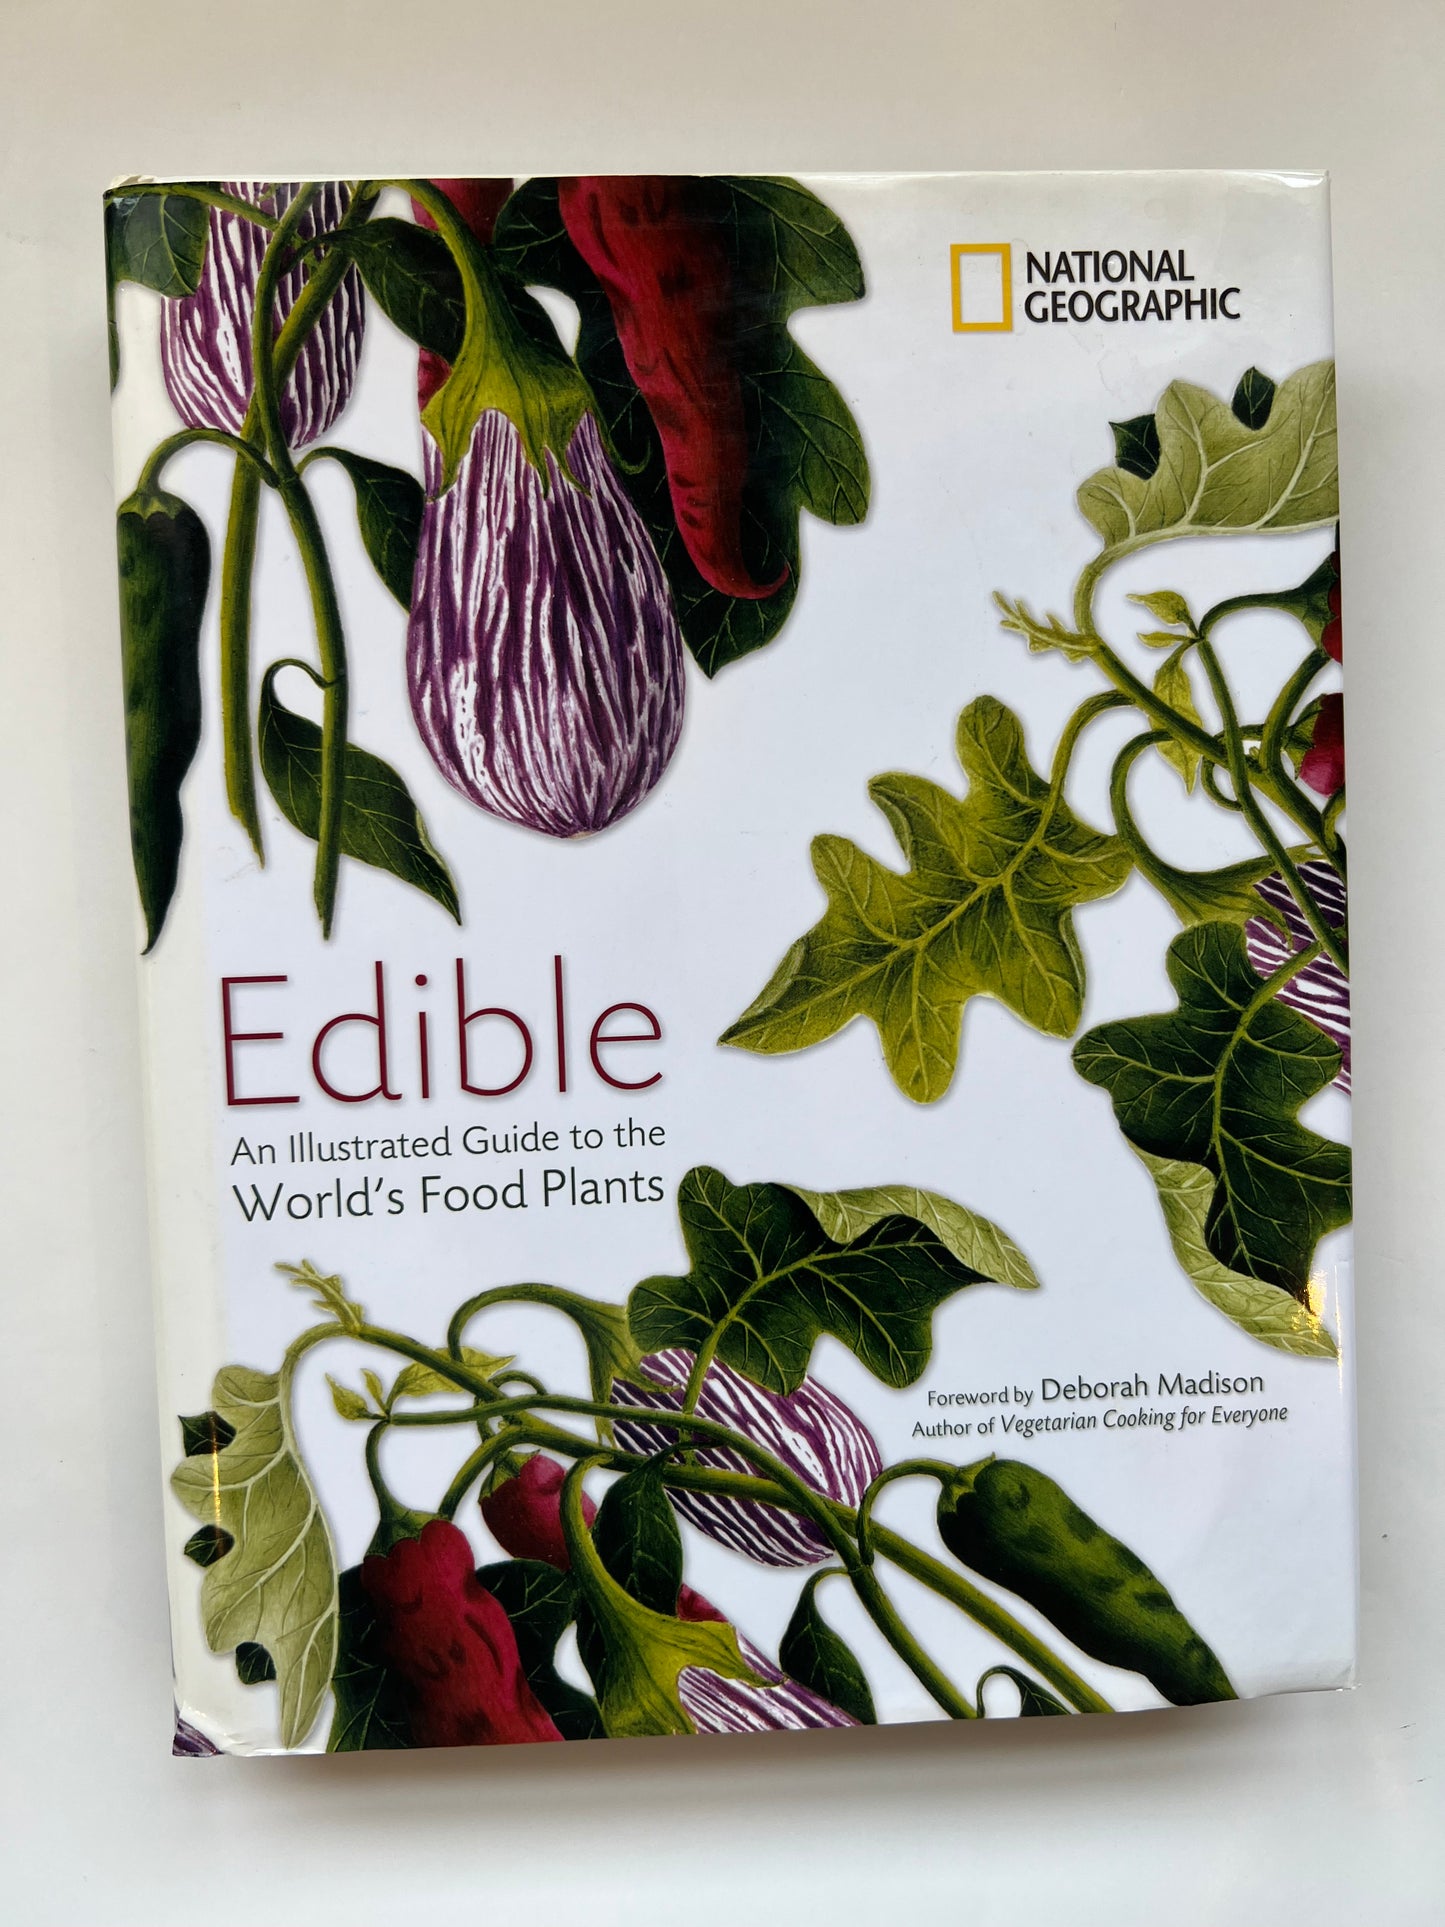 National Geographic: Edible